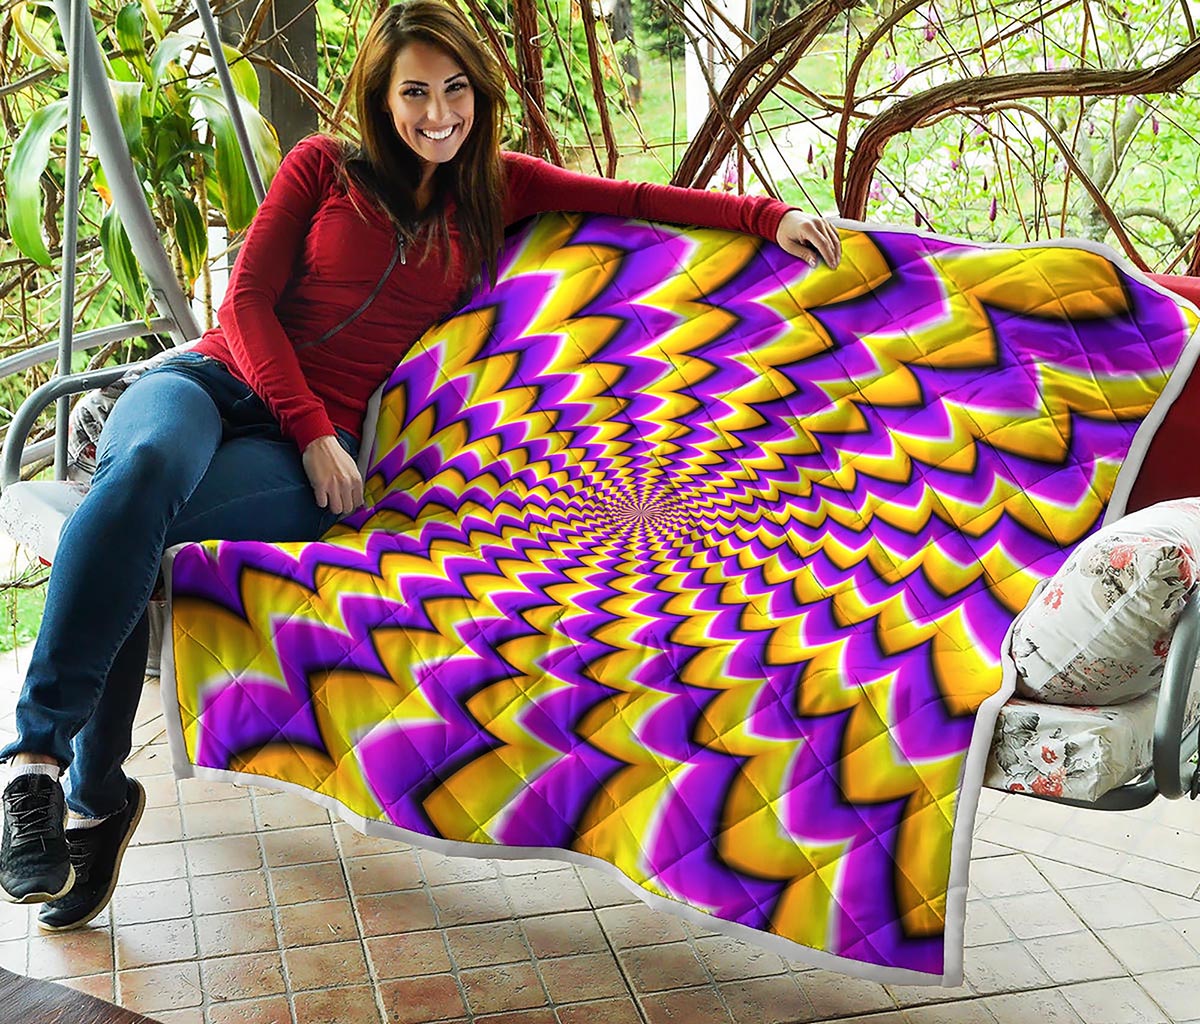 Yellow Dizzy Moving Optical Illusion Quilt